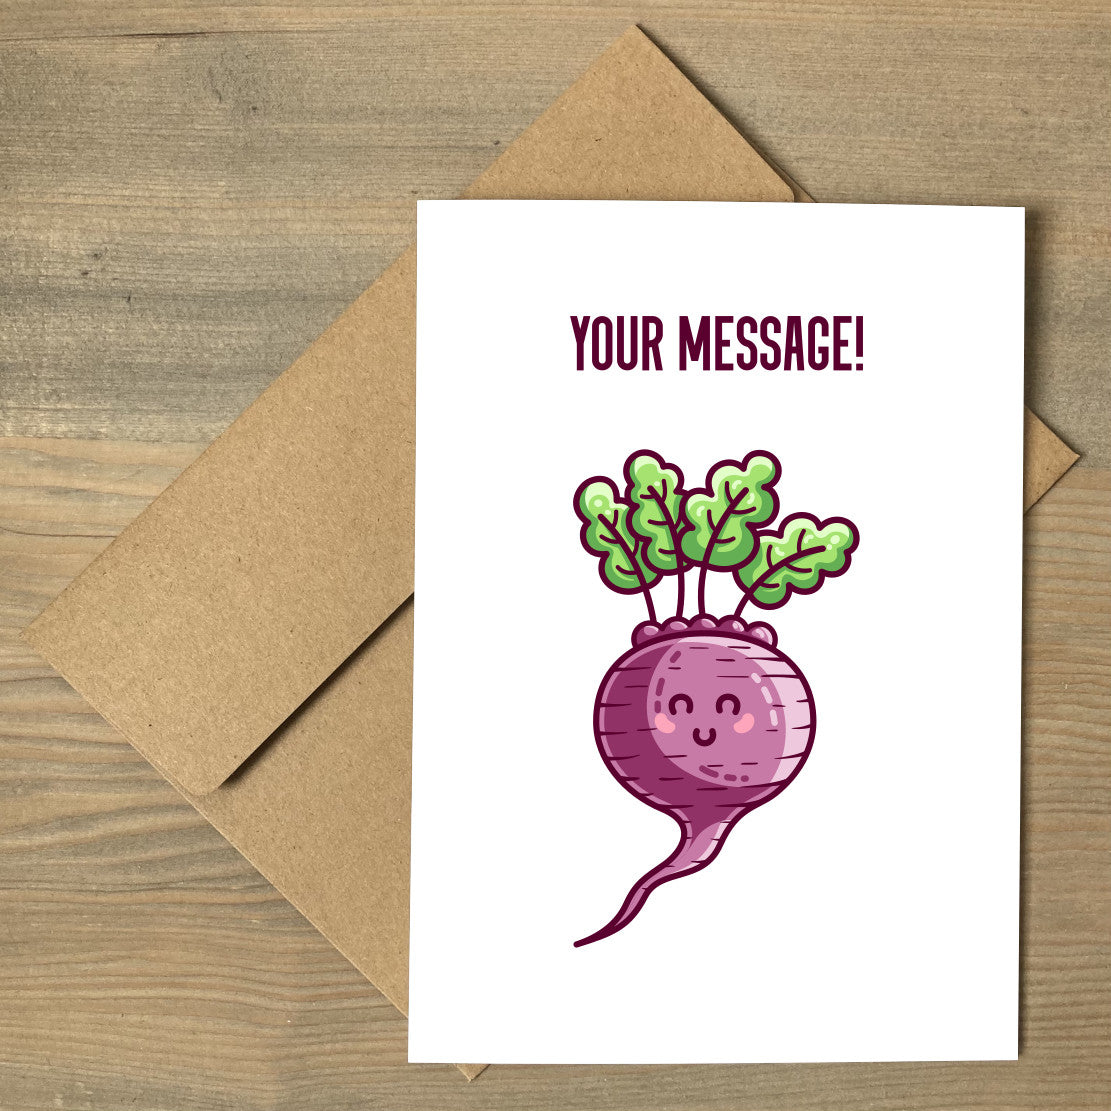 A white greeting card lying flat on a brown envelope, with a design of a kawaii cute leafy beetroot and your personalised wording above